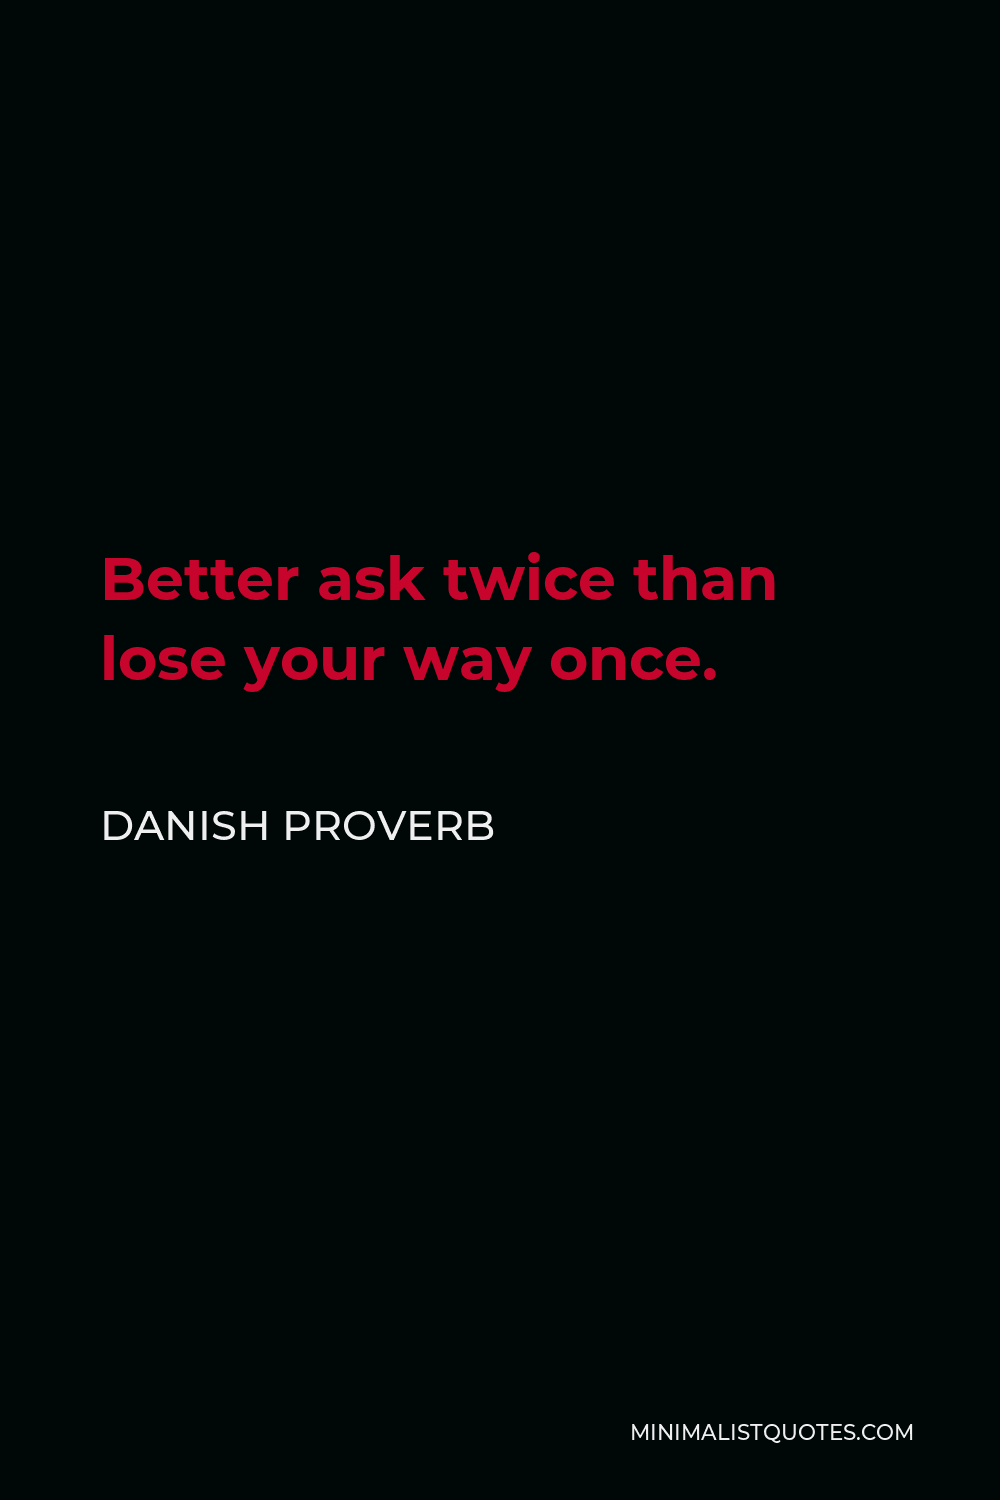 Danish Proverb Quote - Better ask twice than lose your way once.